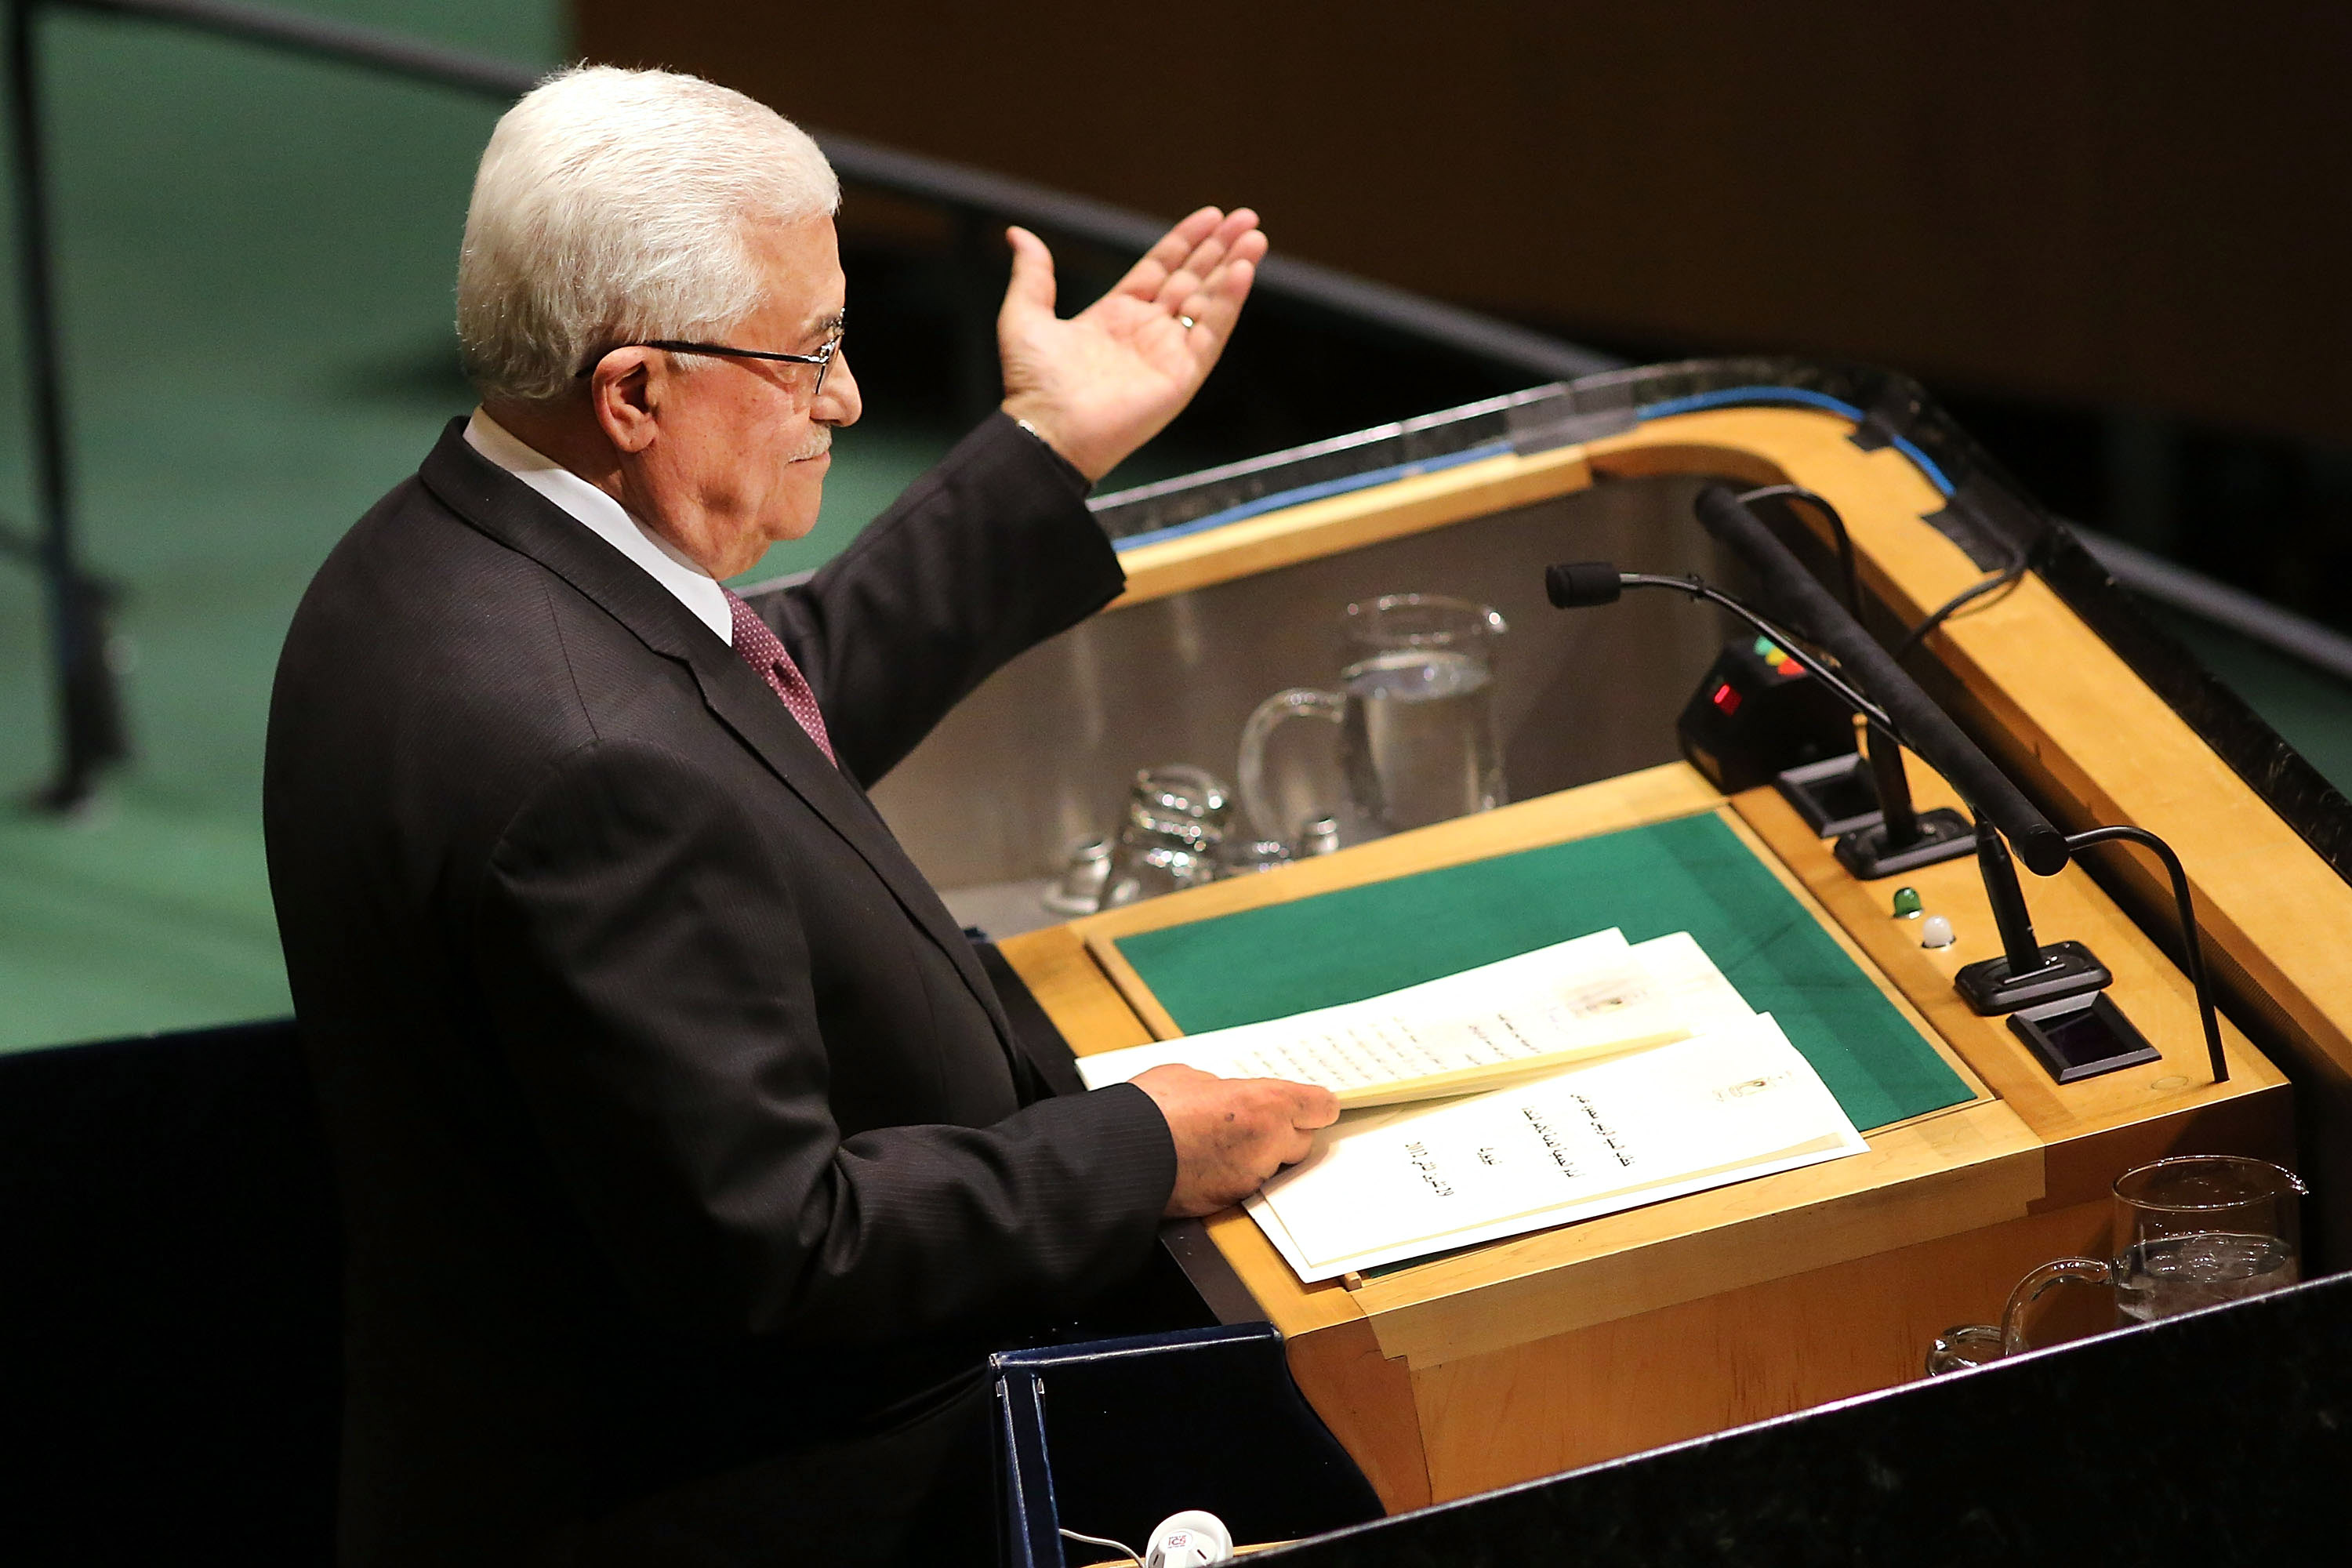 NEW YORK, NY - NOVEMBER 29: Palestinian Authority President Mahmoud Abbas addresses the General Assembly at the United Nations before a UN General Assembly vote on upgrading the status of the Palestinians to non-member observer state on November 29, 2012 in New York City. With many European nations in favor, it looks certain that the Palestinians will win the coveted U.N. recognition as a state today. Spencer Platt/Getty Images/AFP== FOR NEWSPAPERS, INTERNET, TELCOS & TELEVISION USE ONLY ==